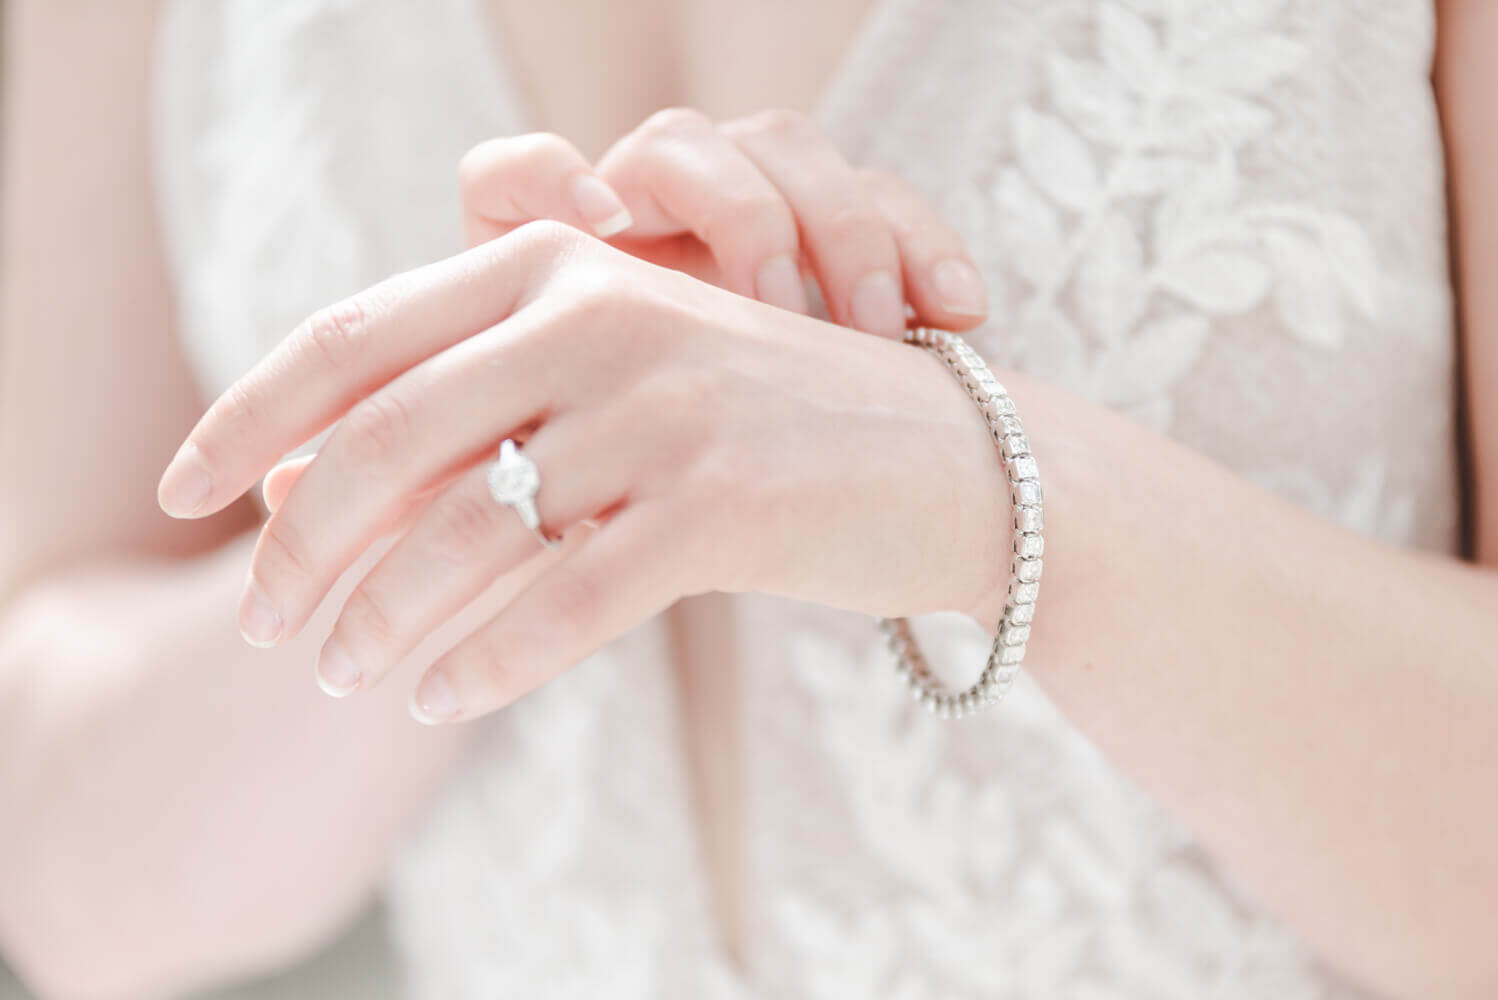 brides hands showing rings and bracelet